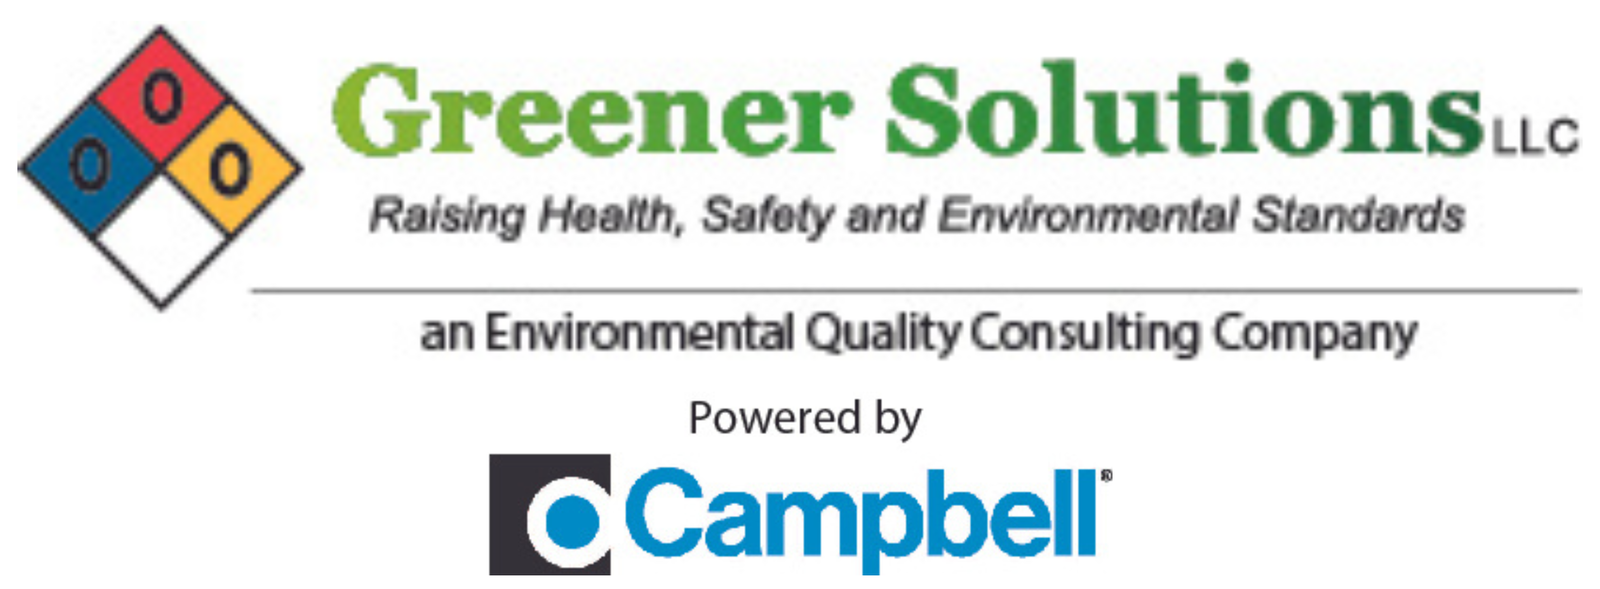 A Environmental Quality Consulting Company